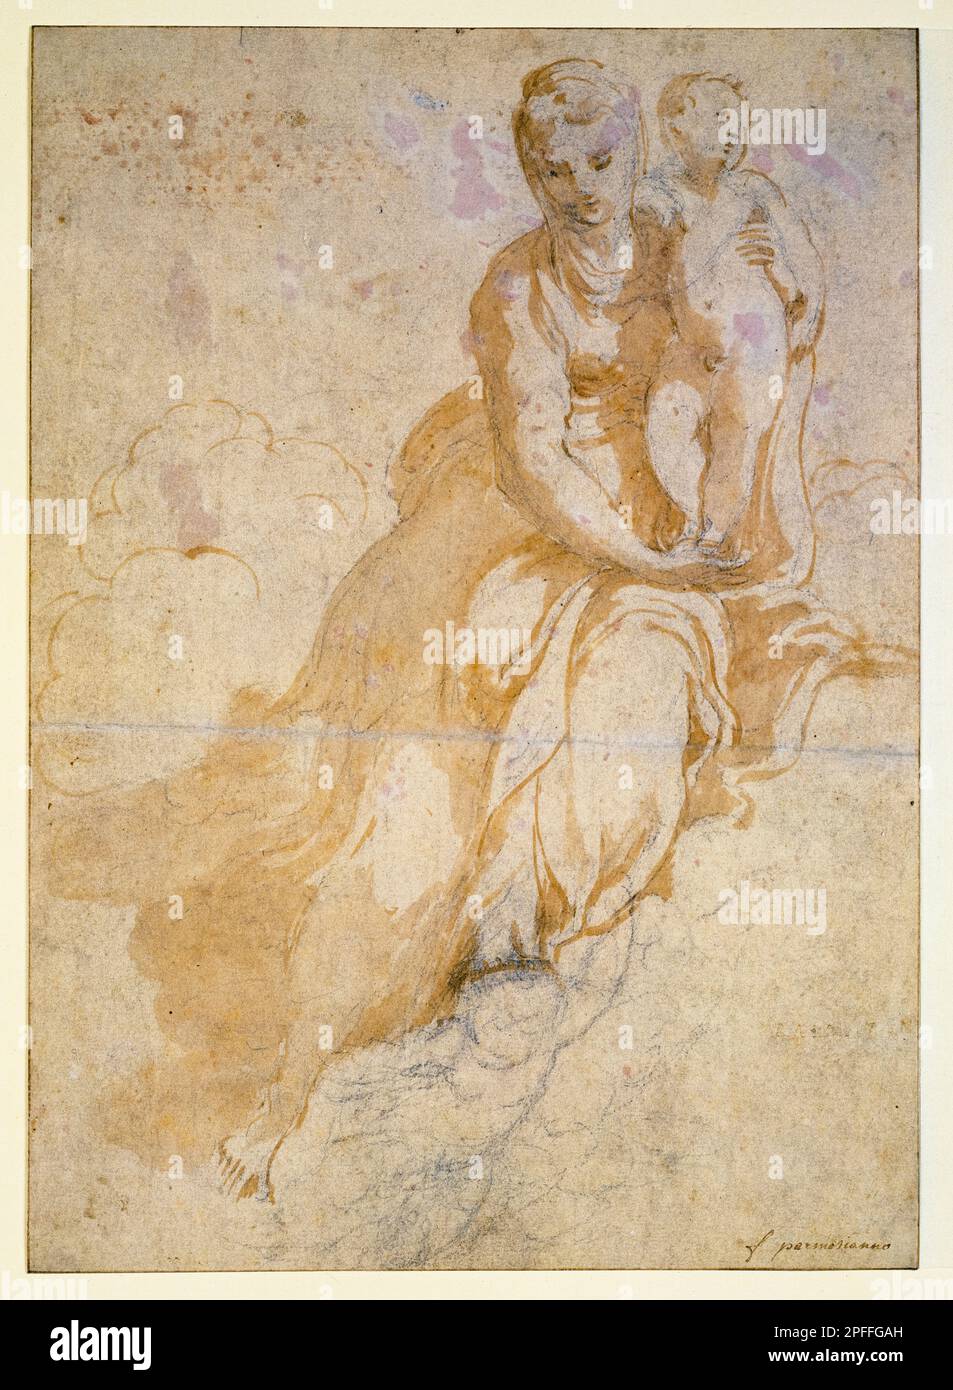 Study of the Madonna and Child, drawing in chalk, wash & brush by Girolamo Francesco Maria Mazzola, 1526-1530 Stock Photo